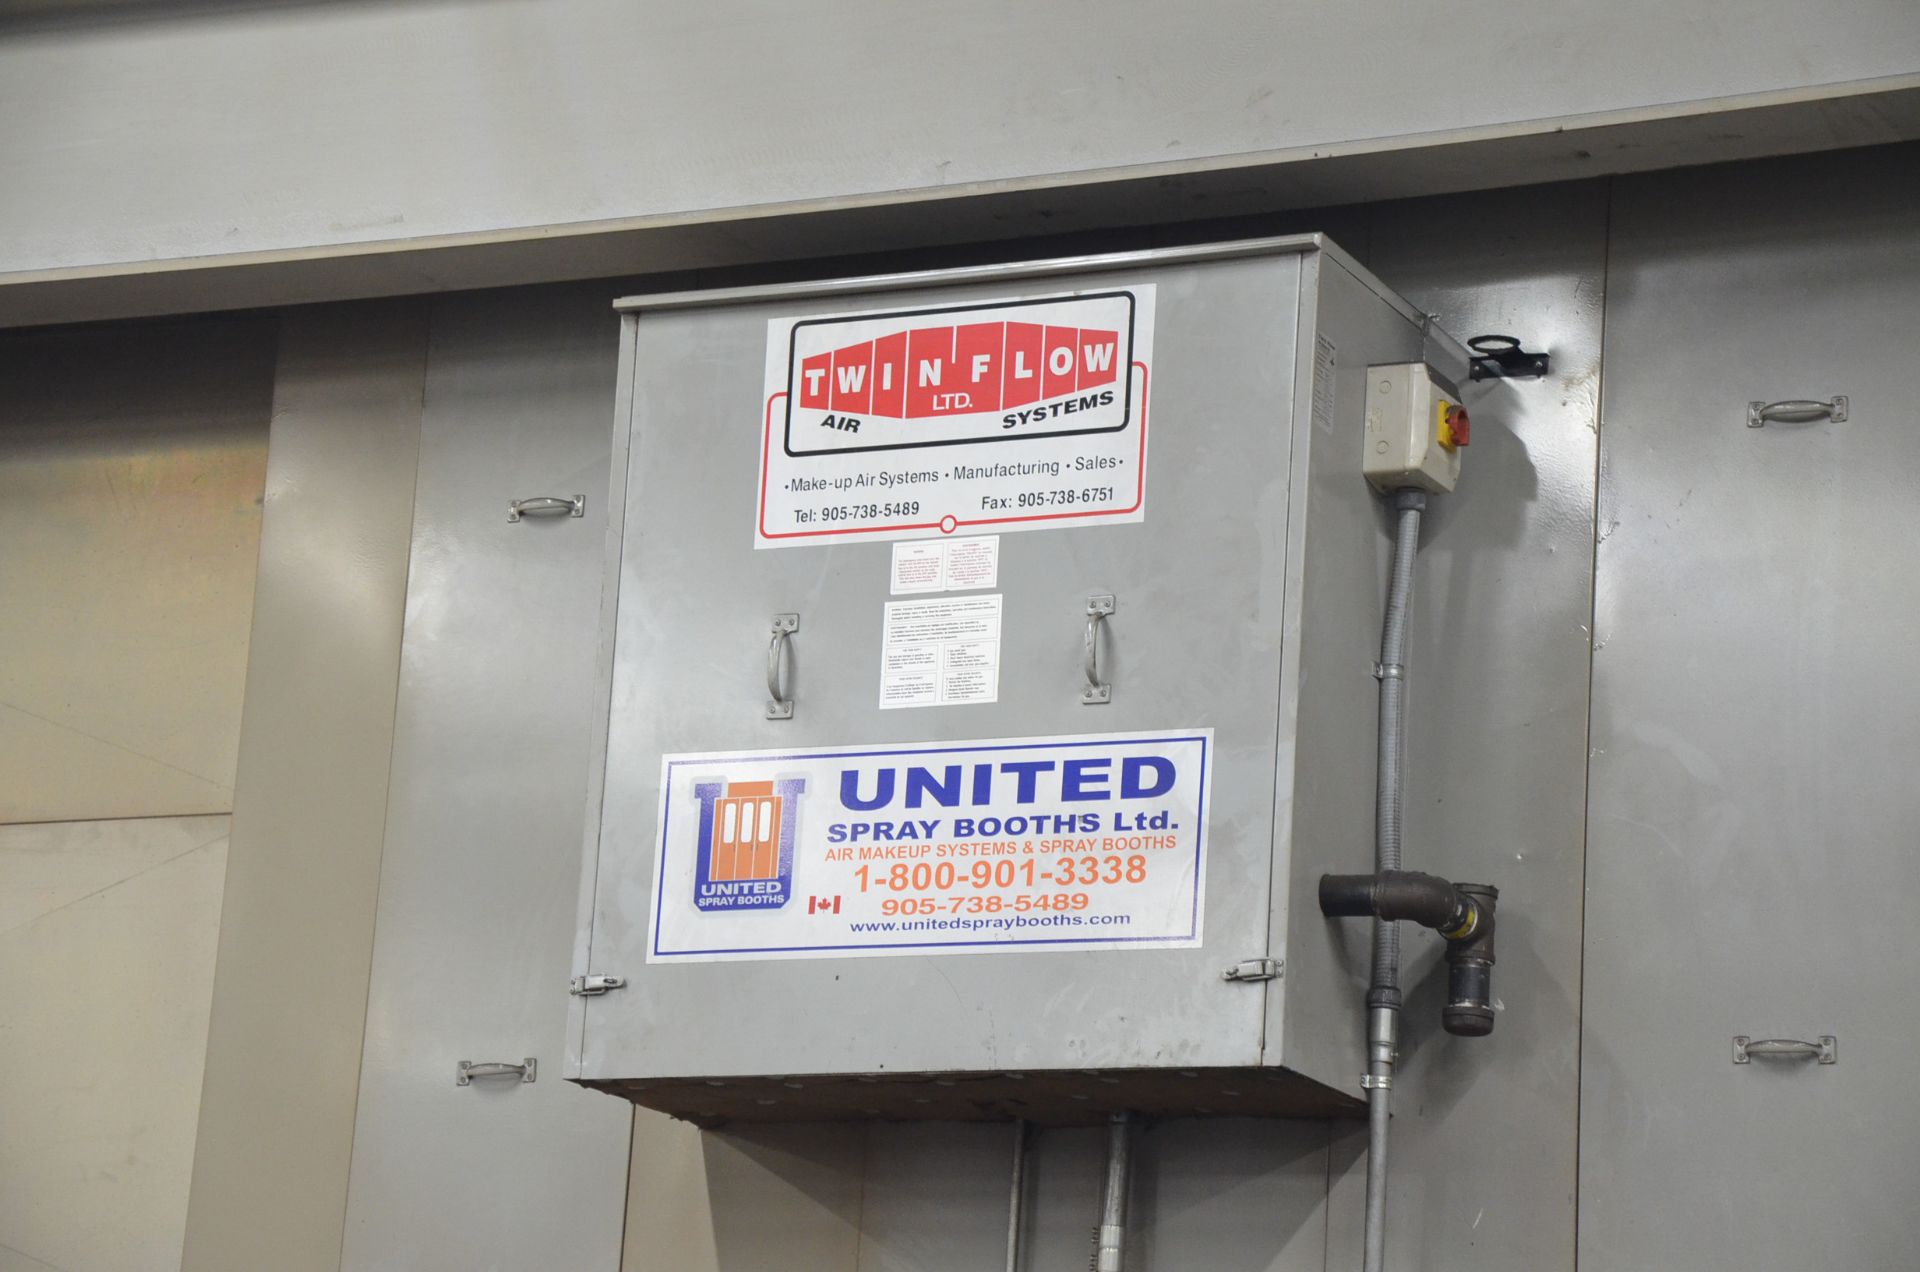 TWINFLOW AIR SYSTEMS (2014) TF5HSN NATURAL GAS FIRED DIRECT AIR MAKE UP UNIT WITH 5,000,000 BTU/HR - Image 3 of 4